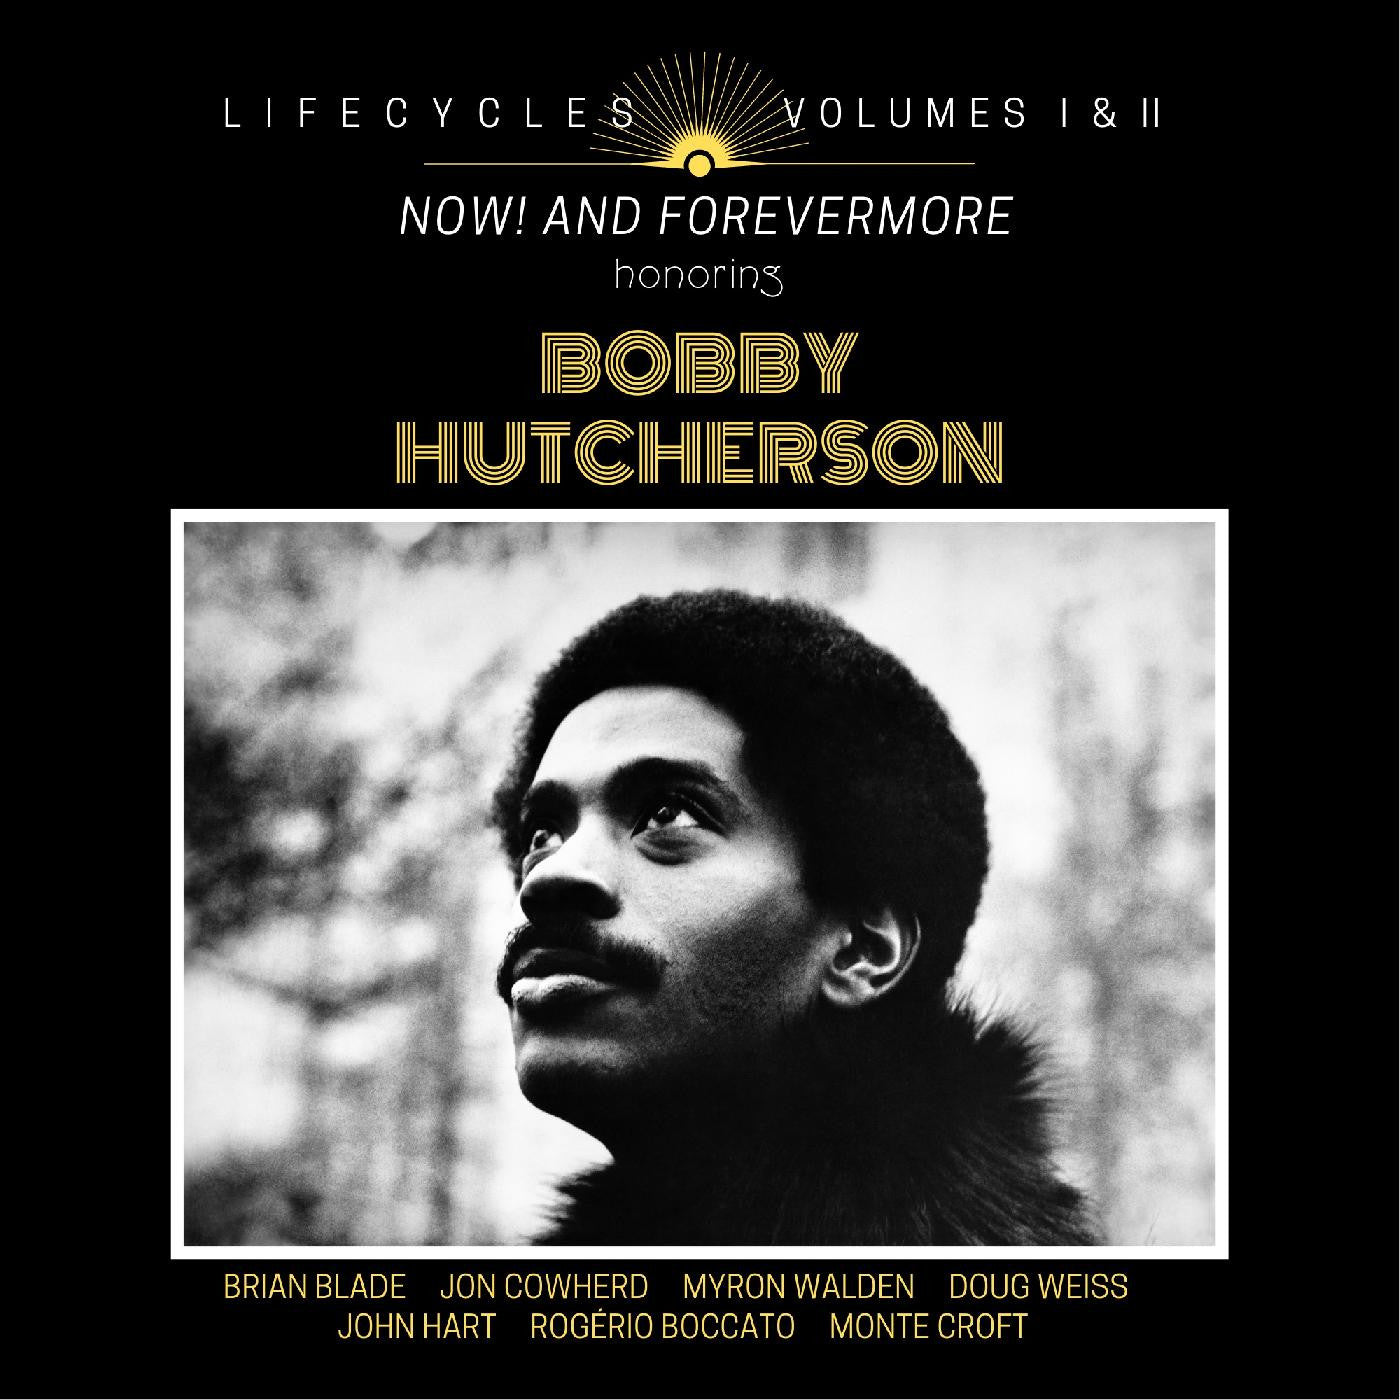 LIFECYCLES Volumes 1 & 2  w/  Brian Blade – Now! and Forever More Honoring Bobby Hutcherson  [3xLP] - New LP